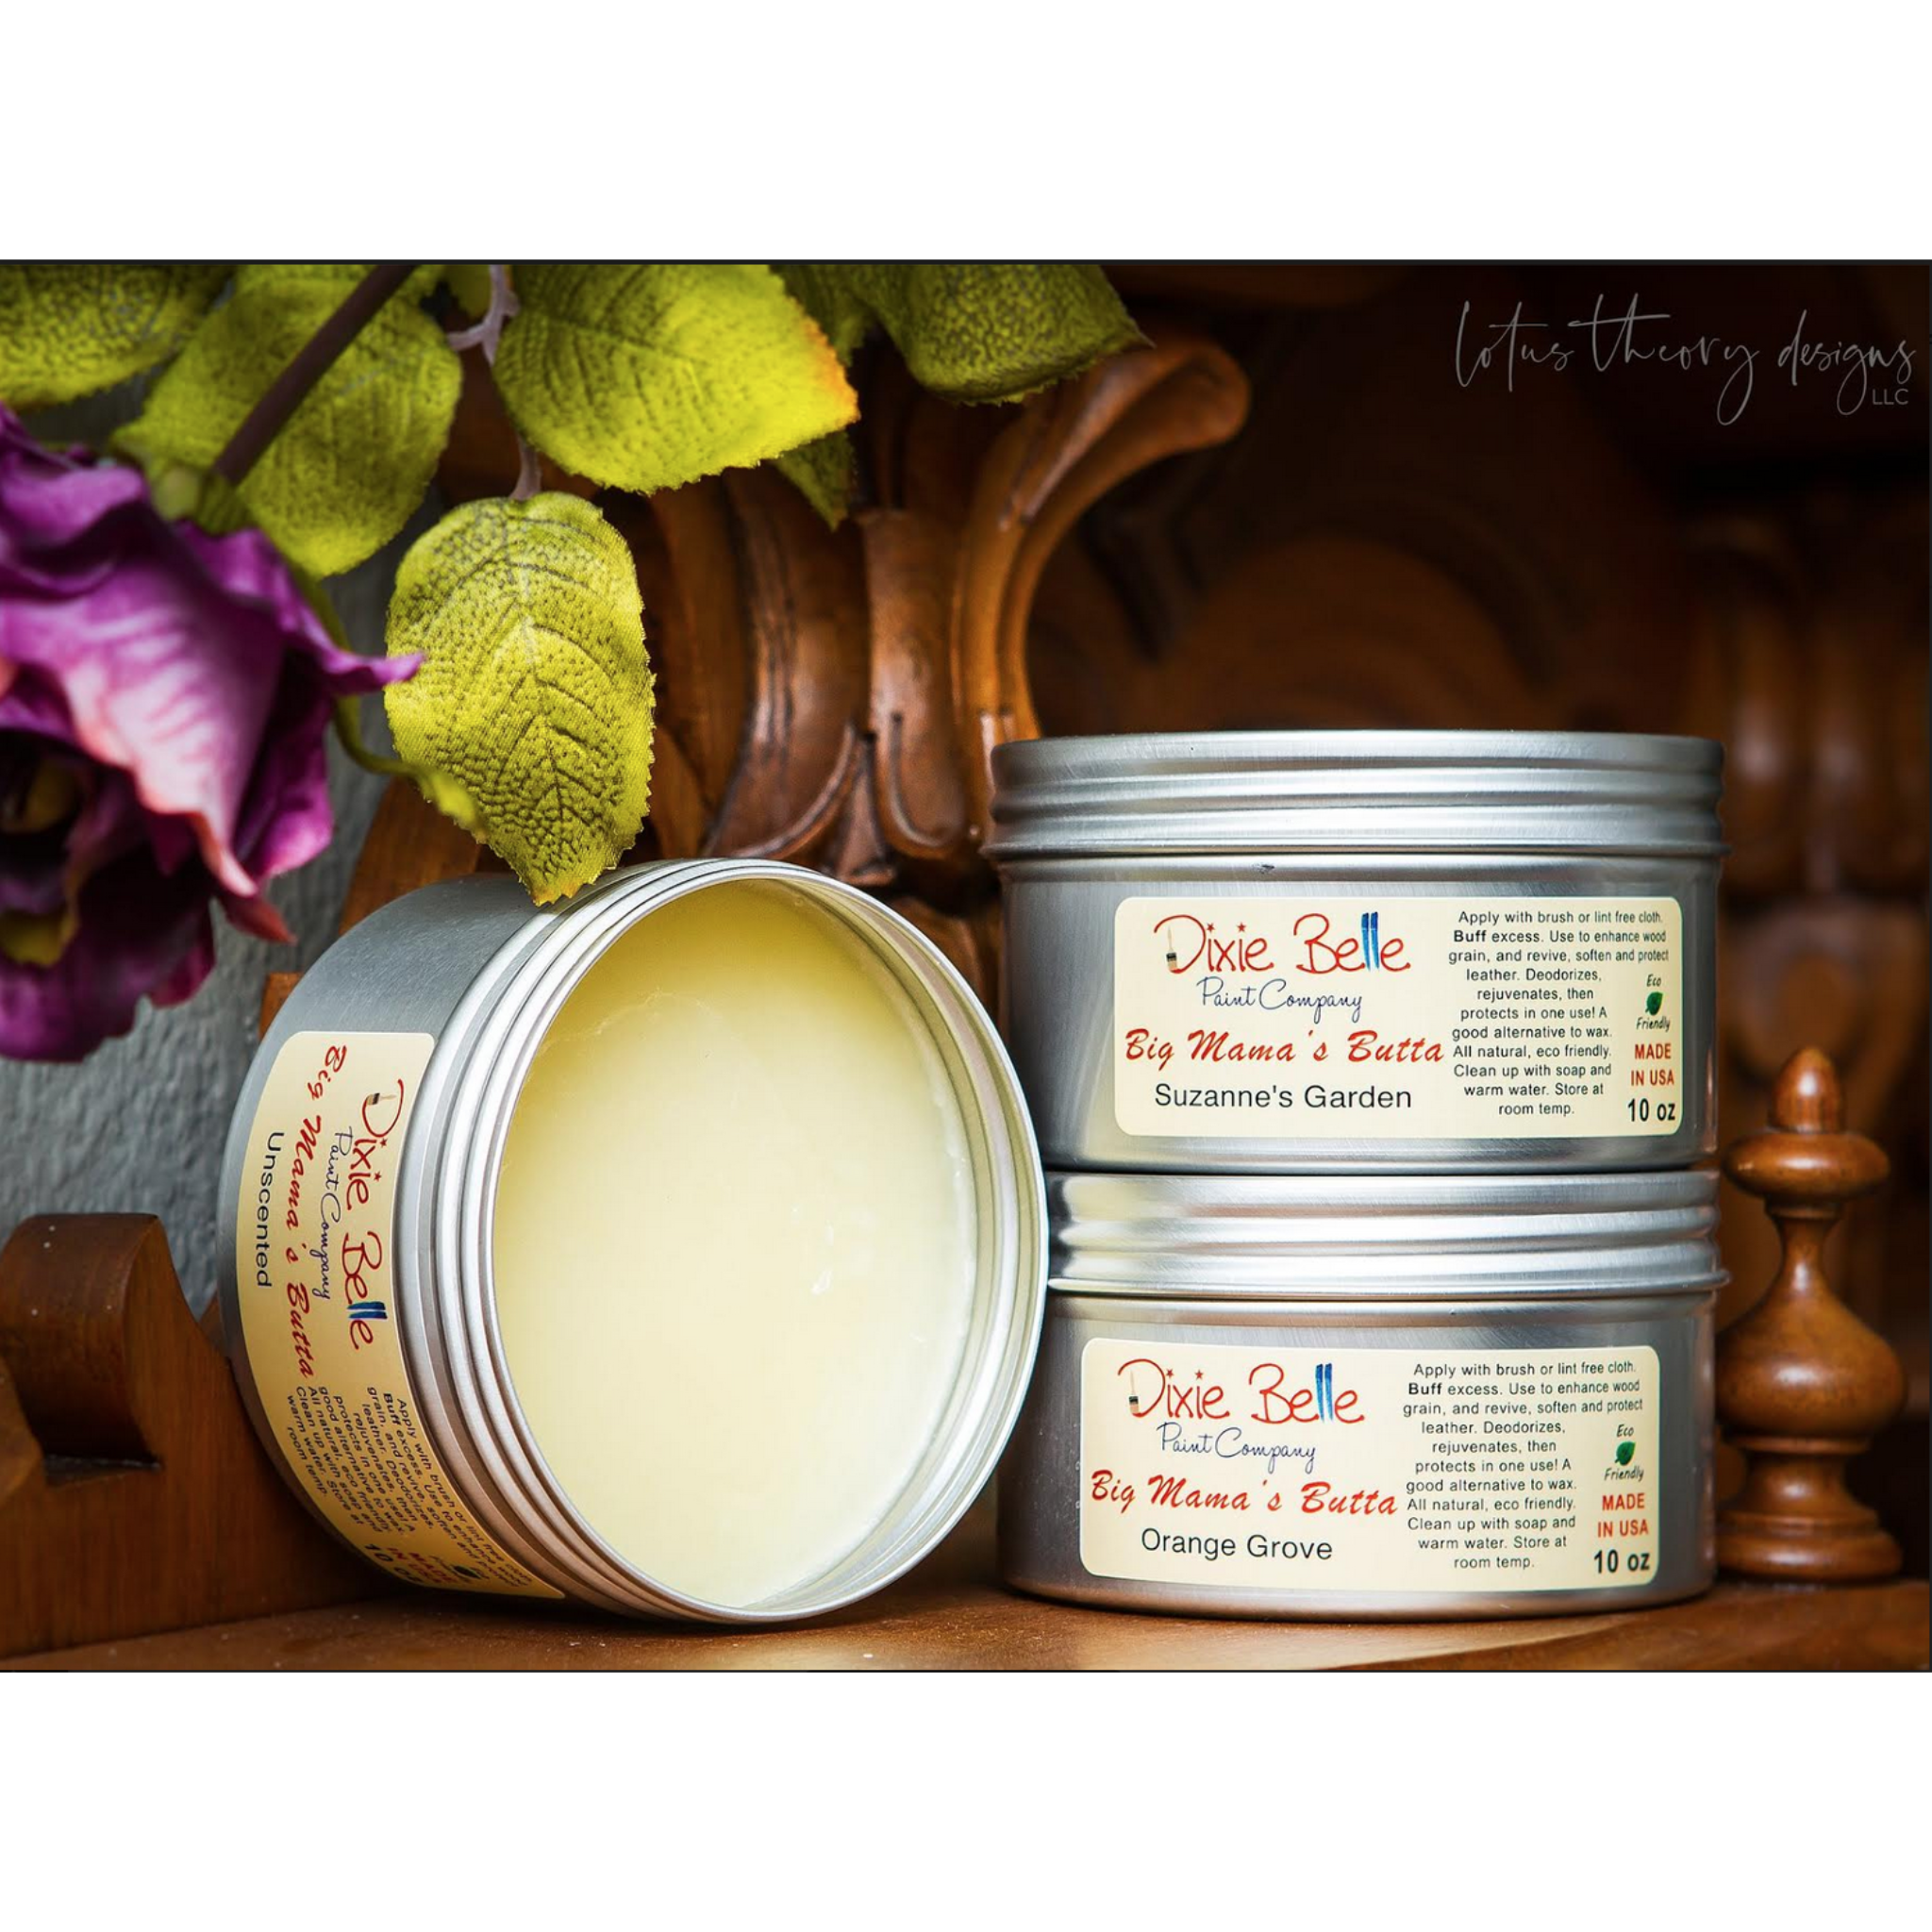 Three 10oz tins of Dixie Belle Paint's Big Mama's Butta in Unscented, Suzanne's Garden, and Orange Grove. The tin of Unscented is laying on its side with the lid off to show the product inside.